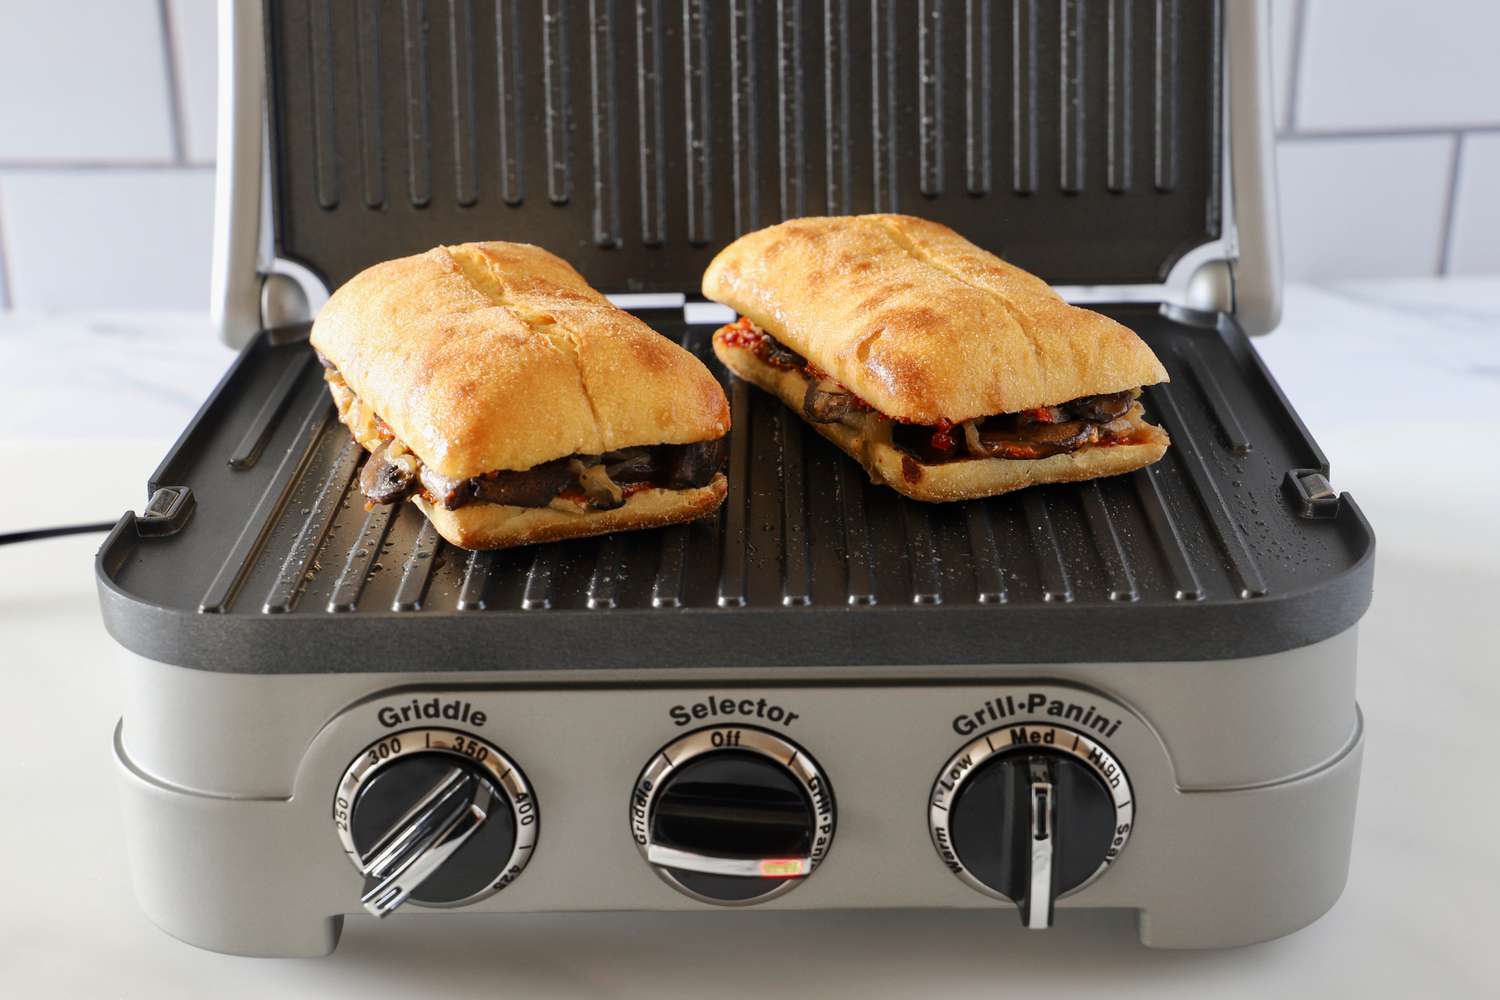 two sandwiches on the grates of a panini press